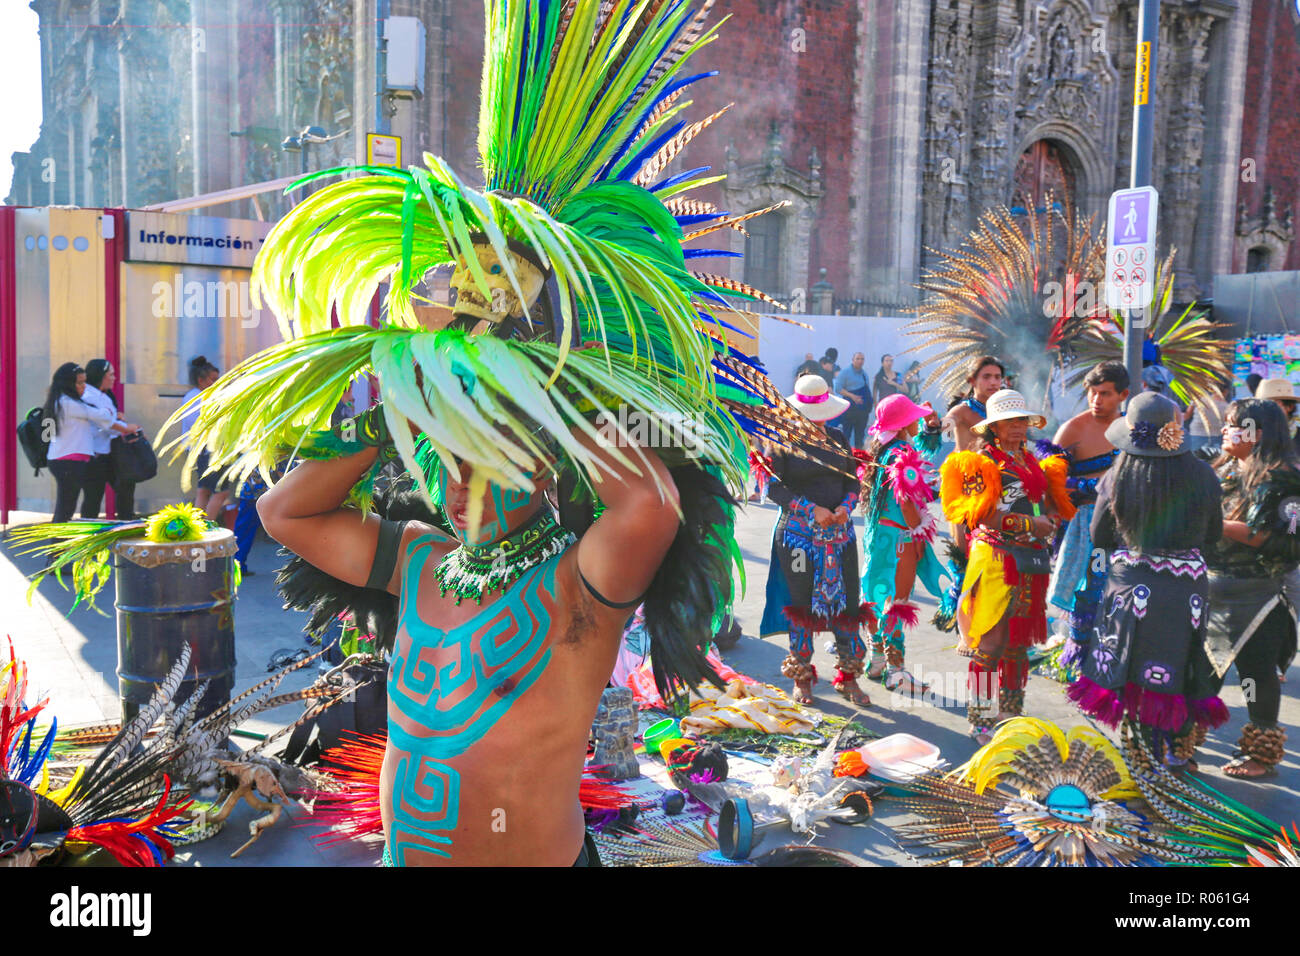 Mexico City, Mexico-23 April, 2018: Indian festival and tribal celebrations on Zocalo square in Mexico City Stock Photo